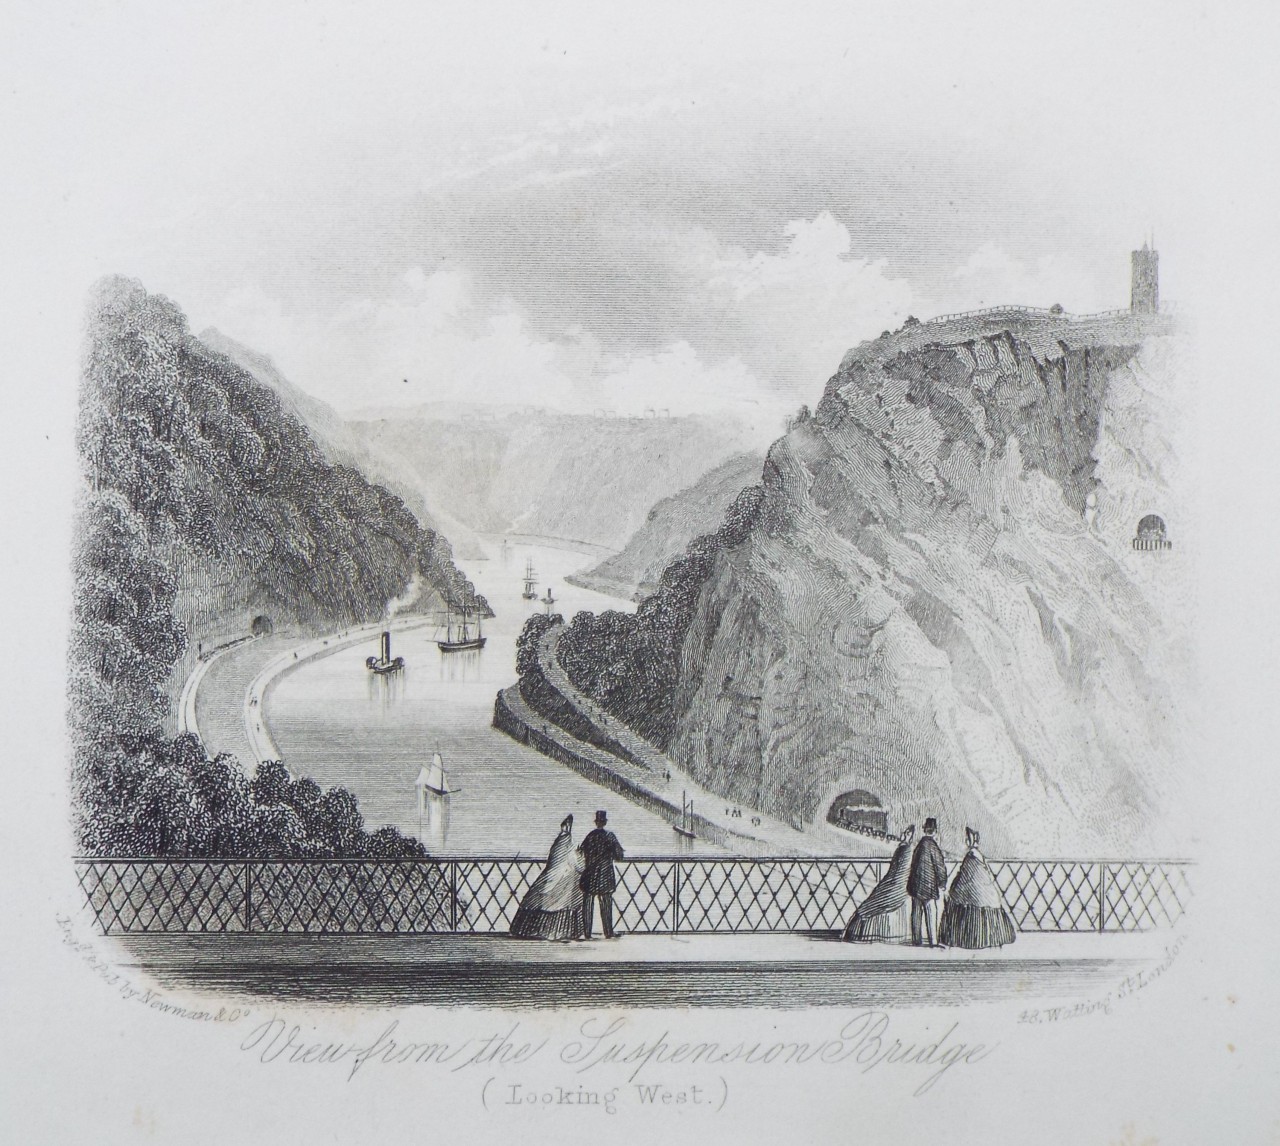 Steel Vignette - View from the Clifton Suspension Bridge (Looking West.) - Newman